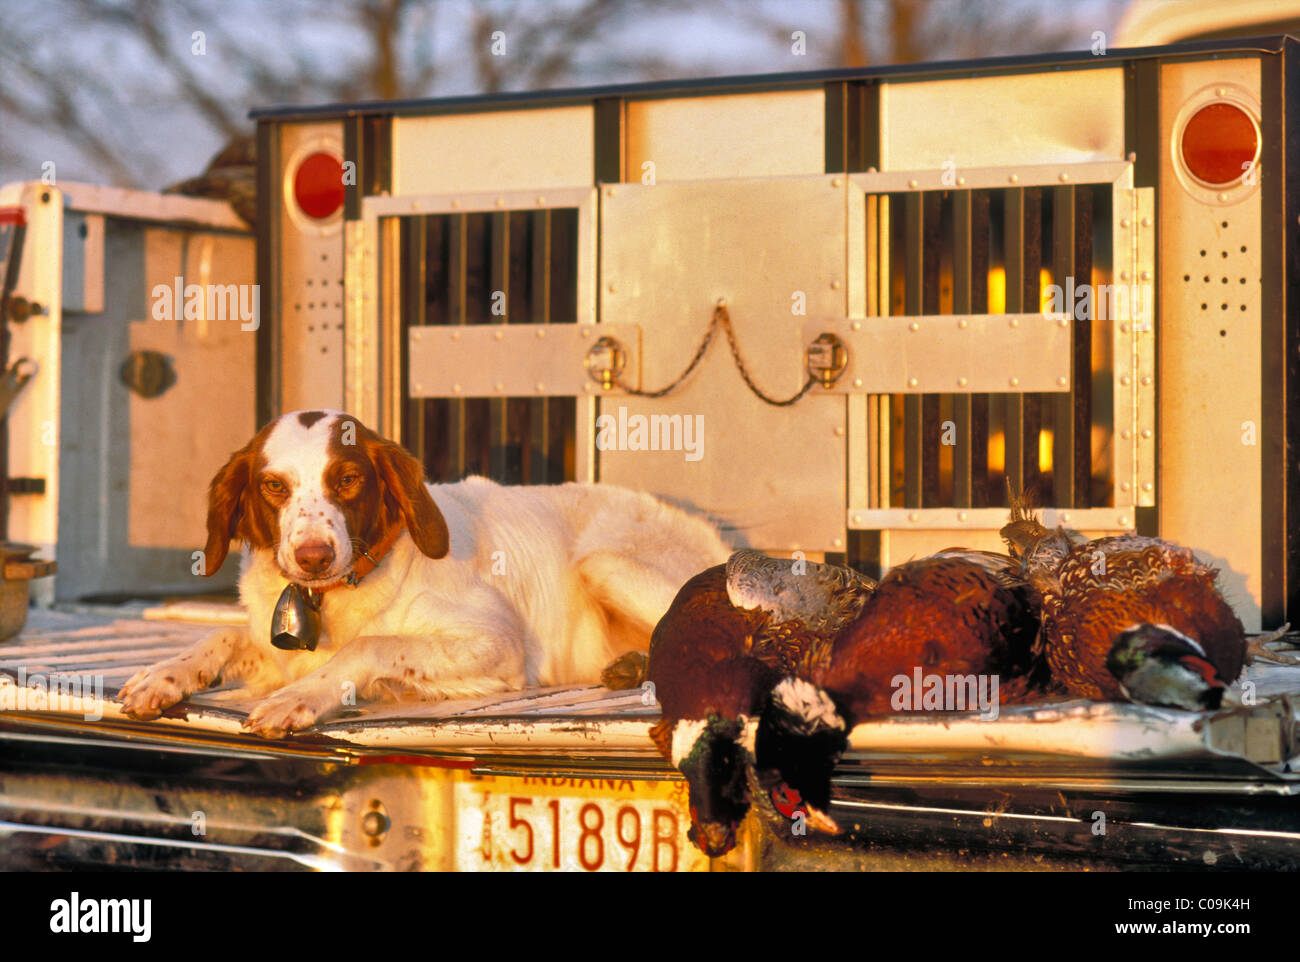 Brittany Bird Dog Laying Beside Harvested Ringneck Pheasants on the Tailgate of a Truck in Indiana Stock Photo